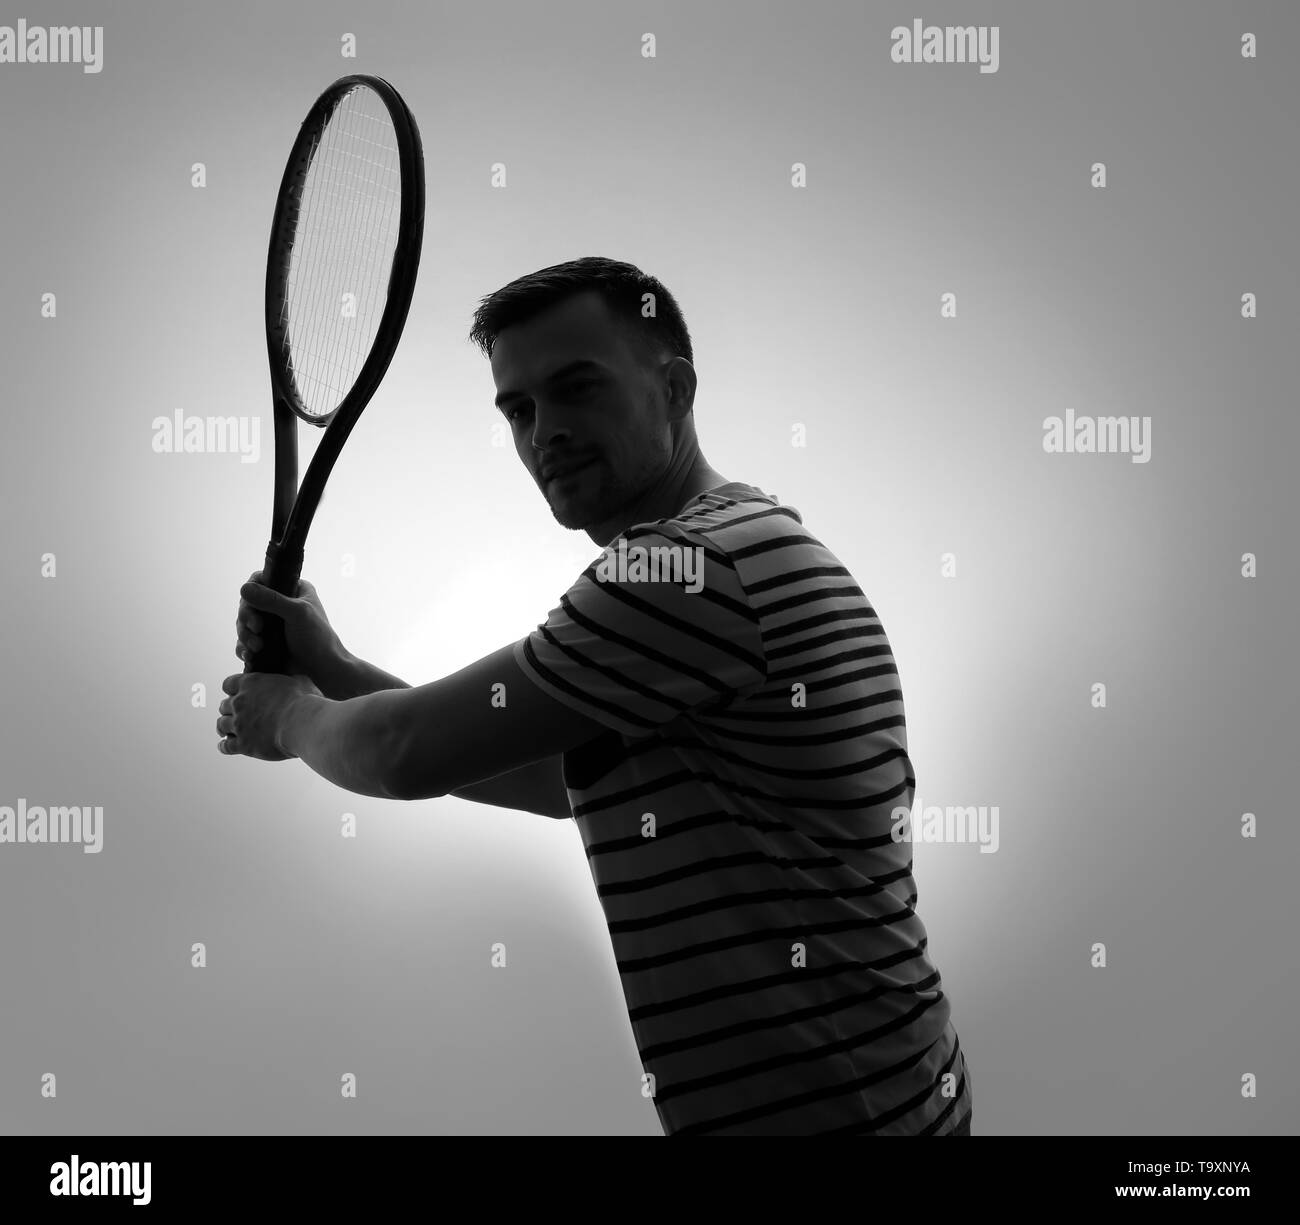 Tennis clothes Black and White Stock Photos & Images - Page 3 - Alamy